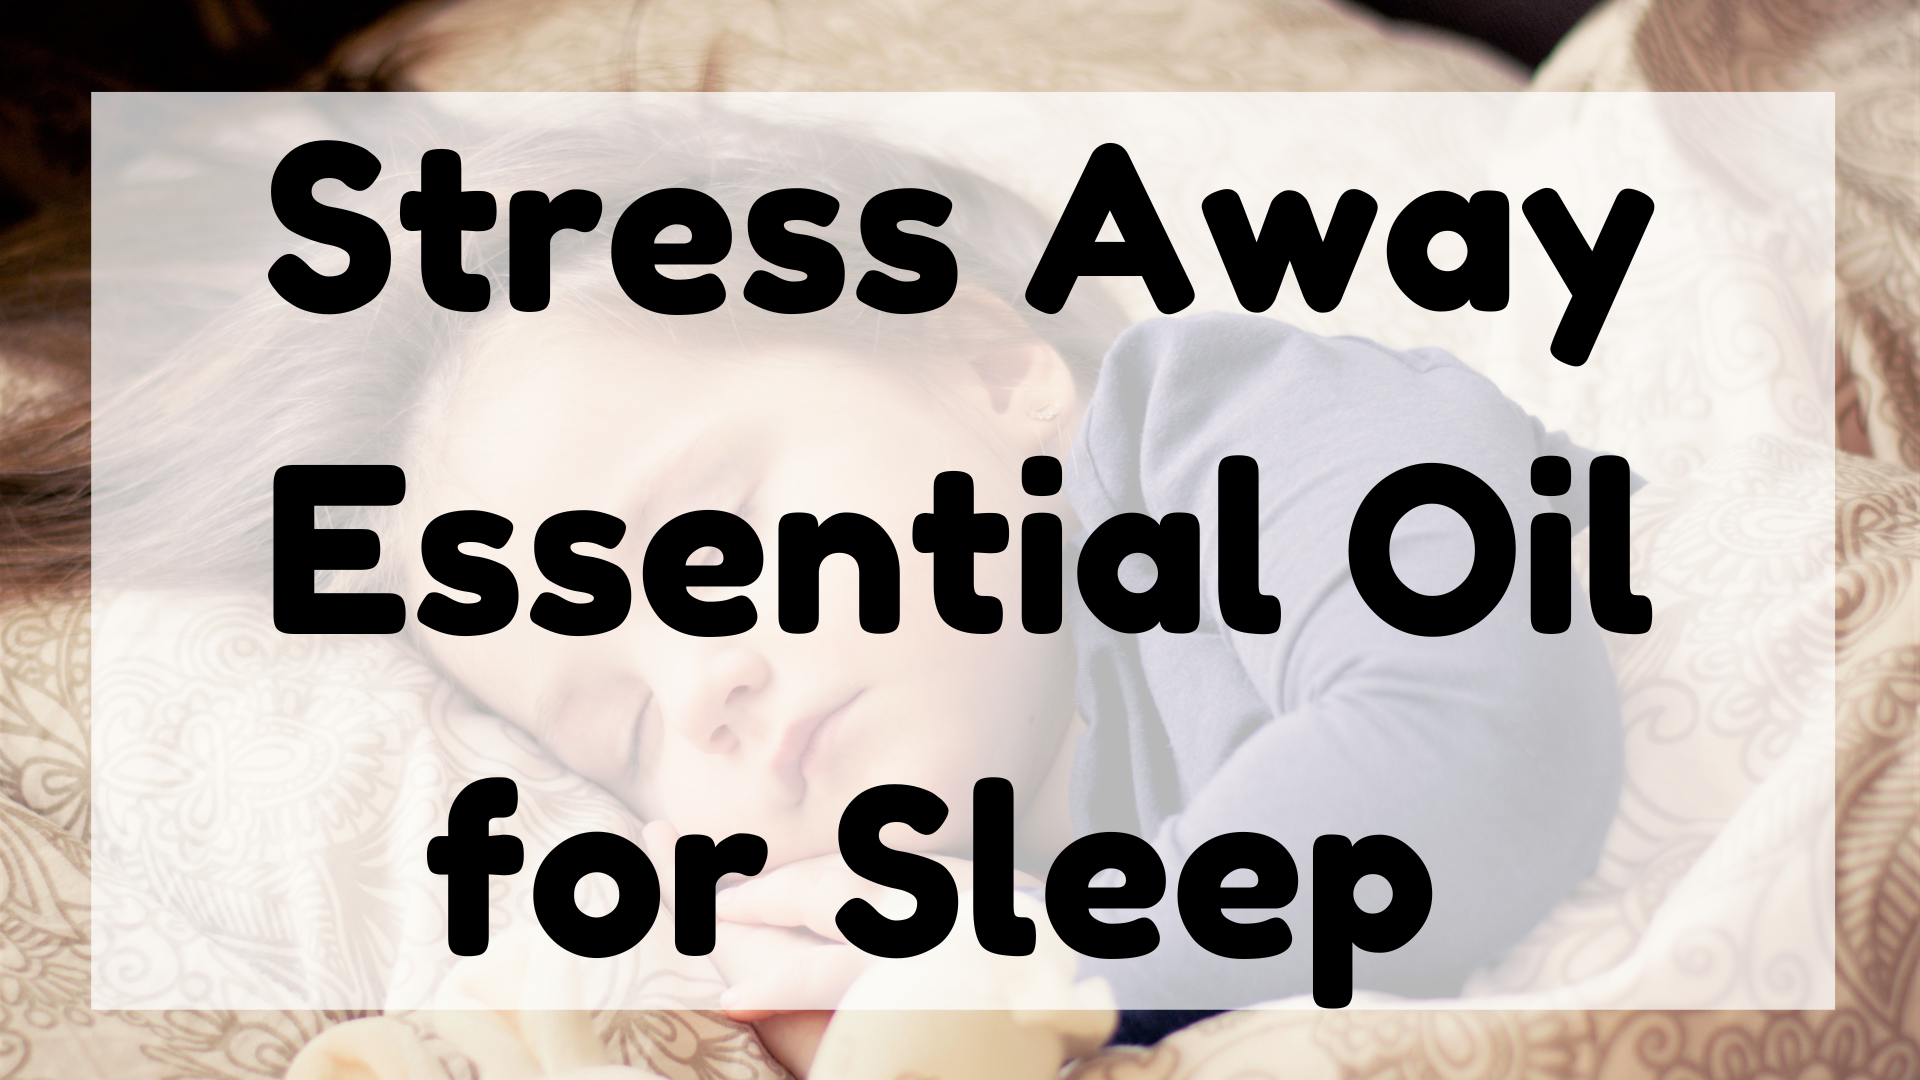 Stress Away Essential Oil for Sleep featured image